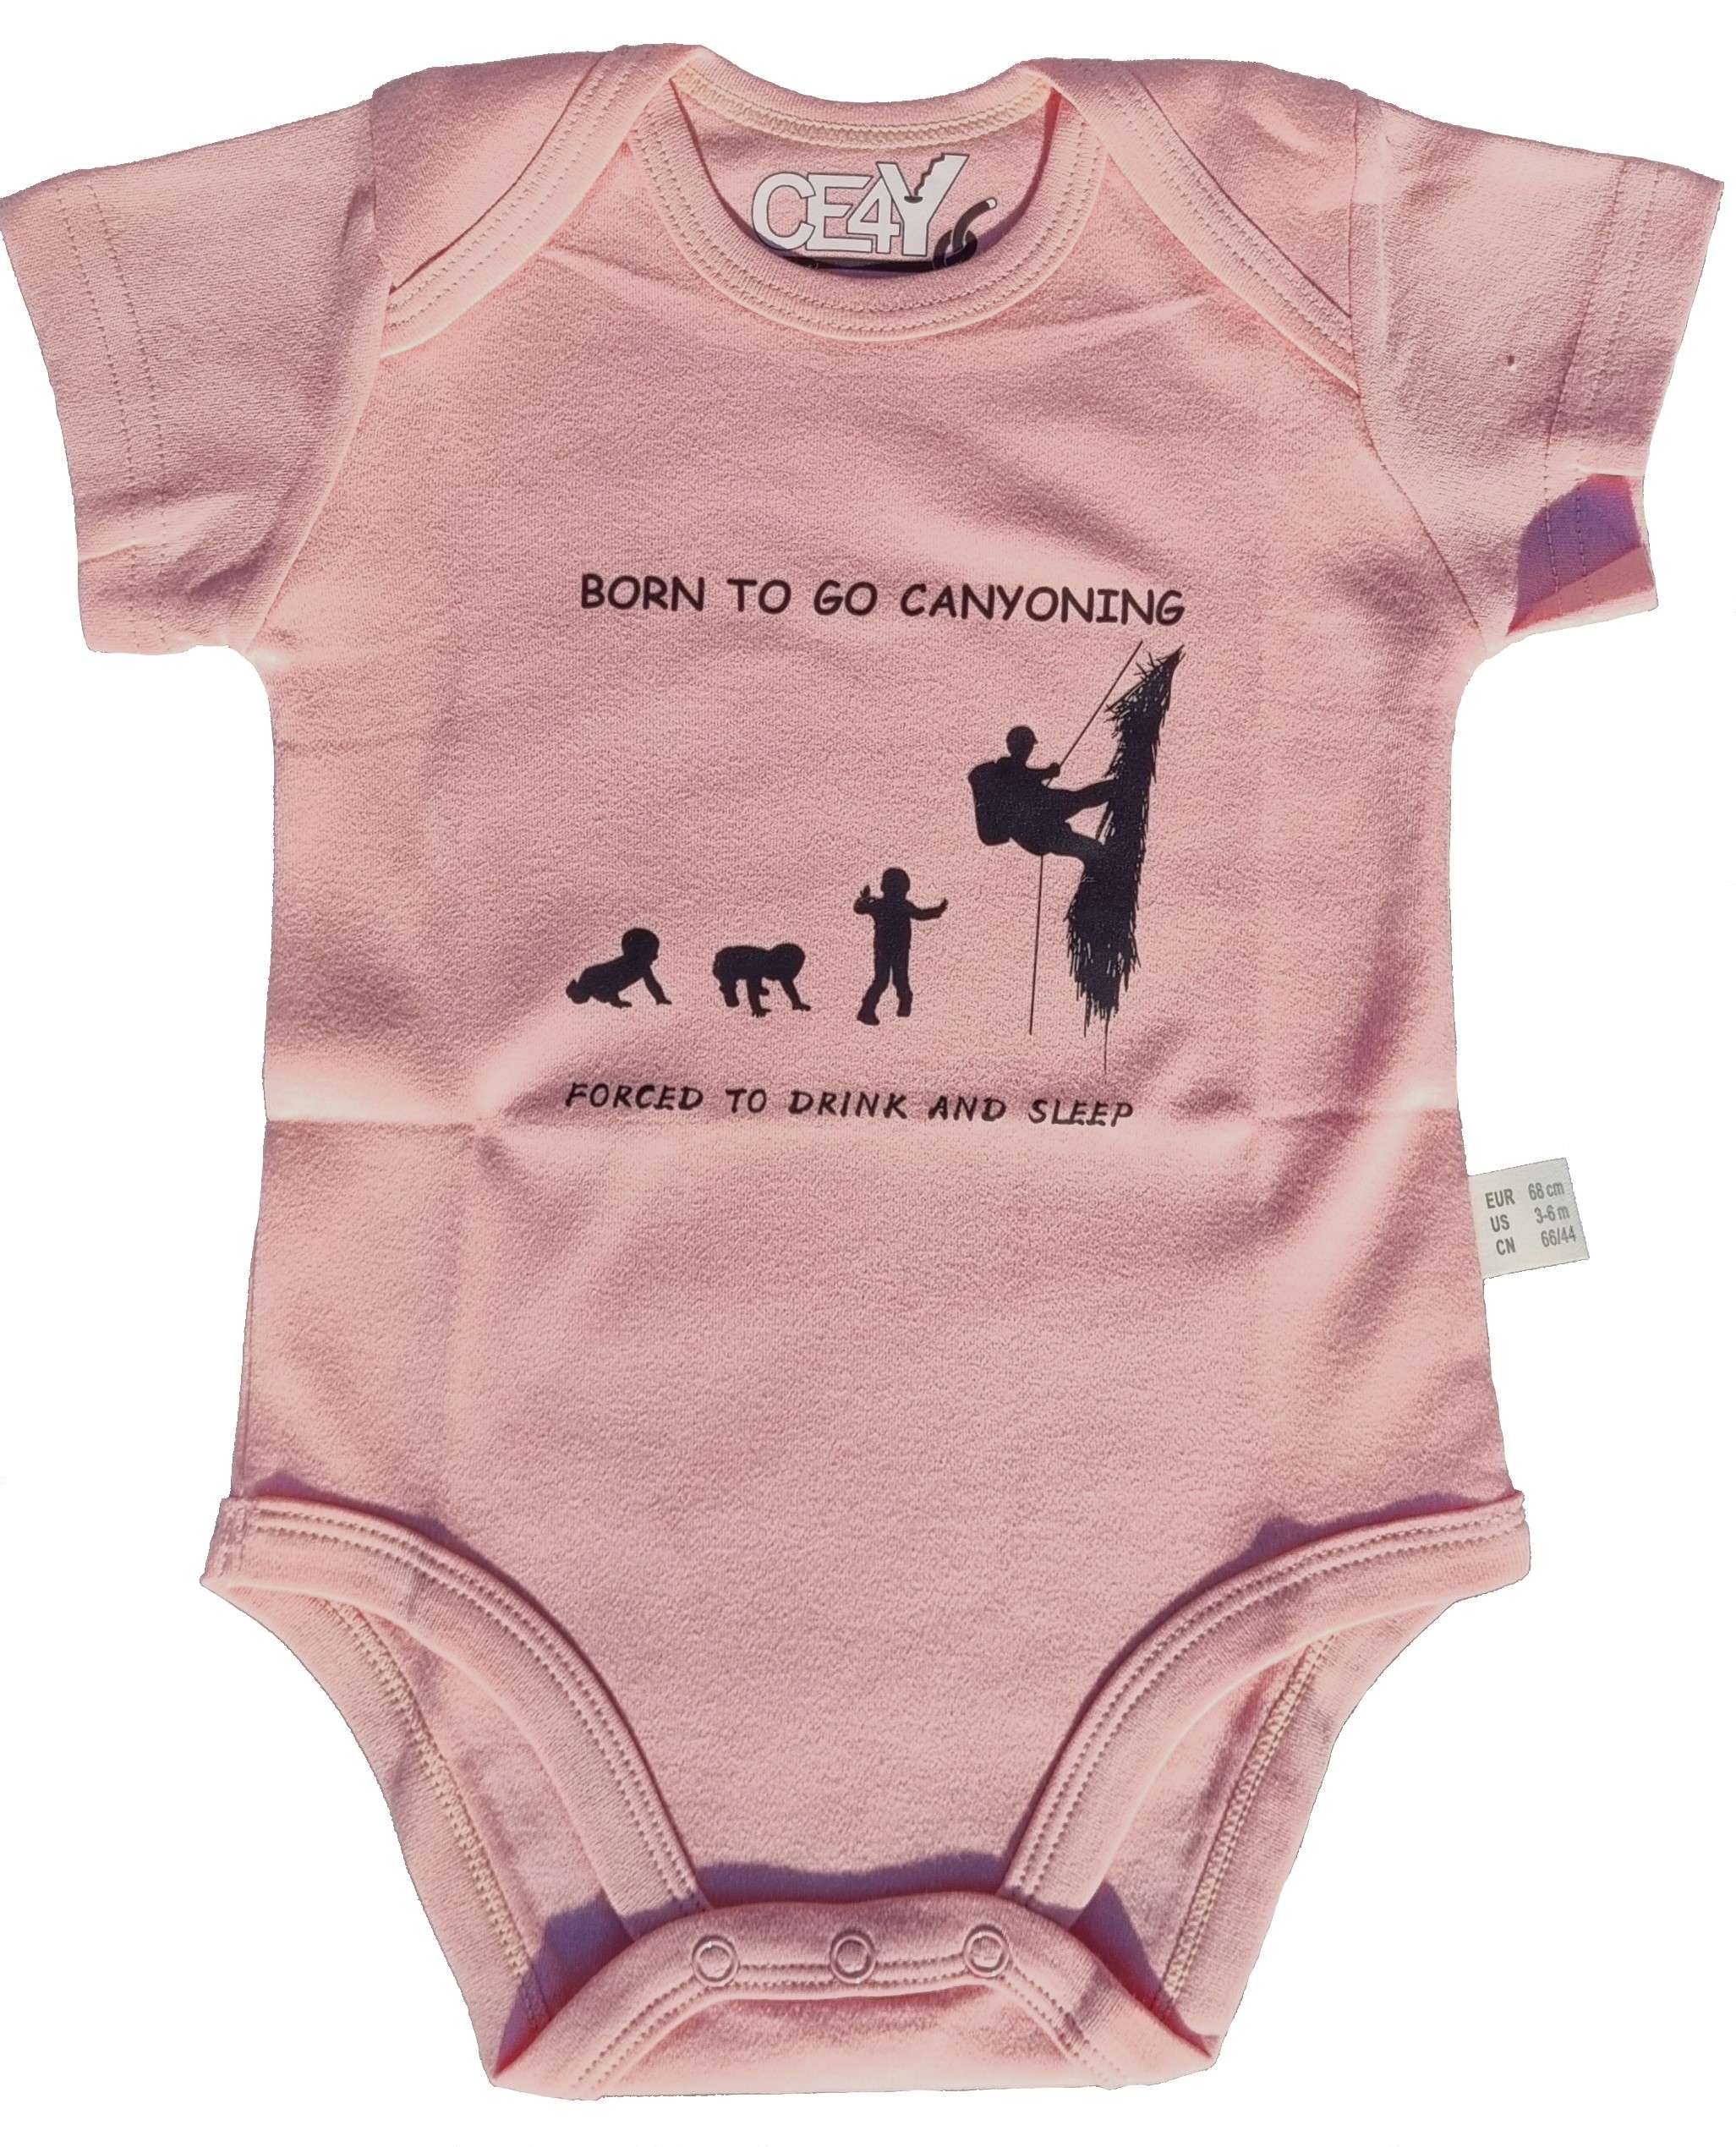 Canyoning baby-body - CE4Y